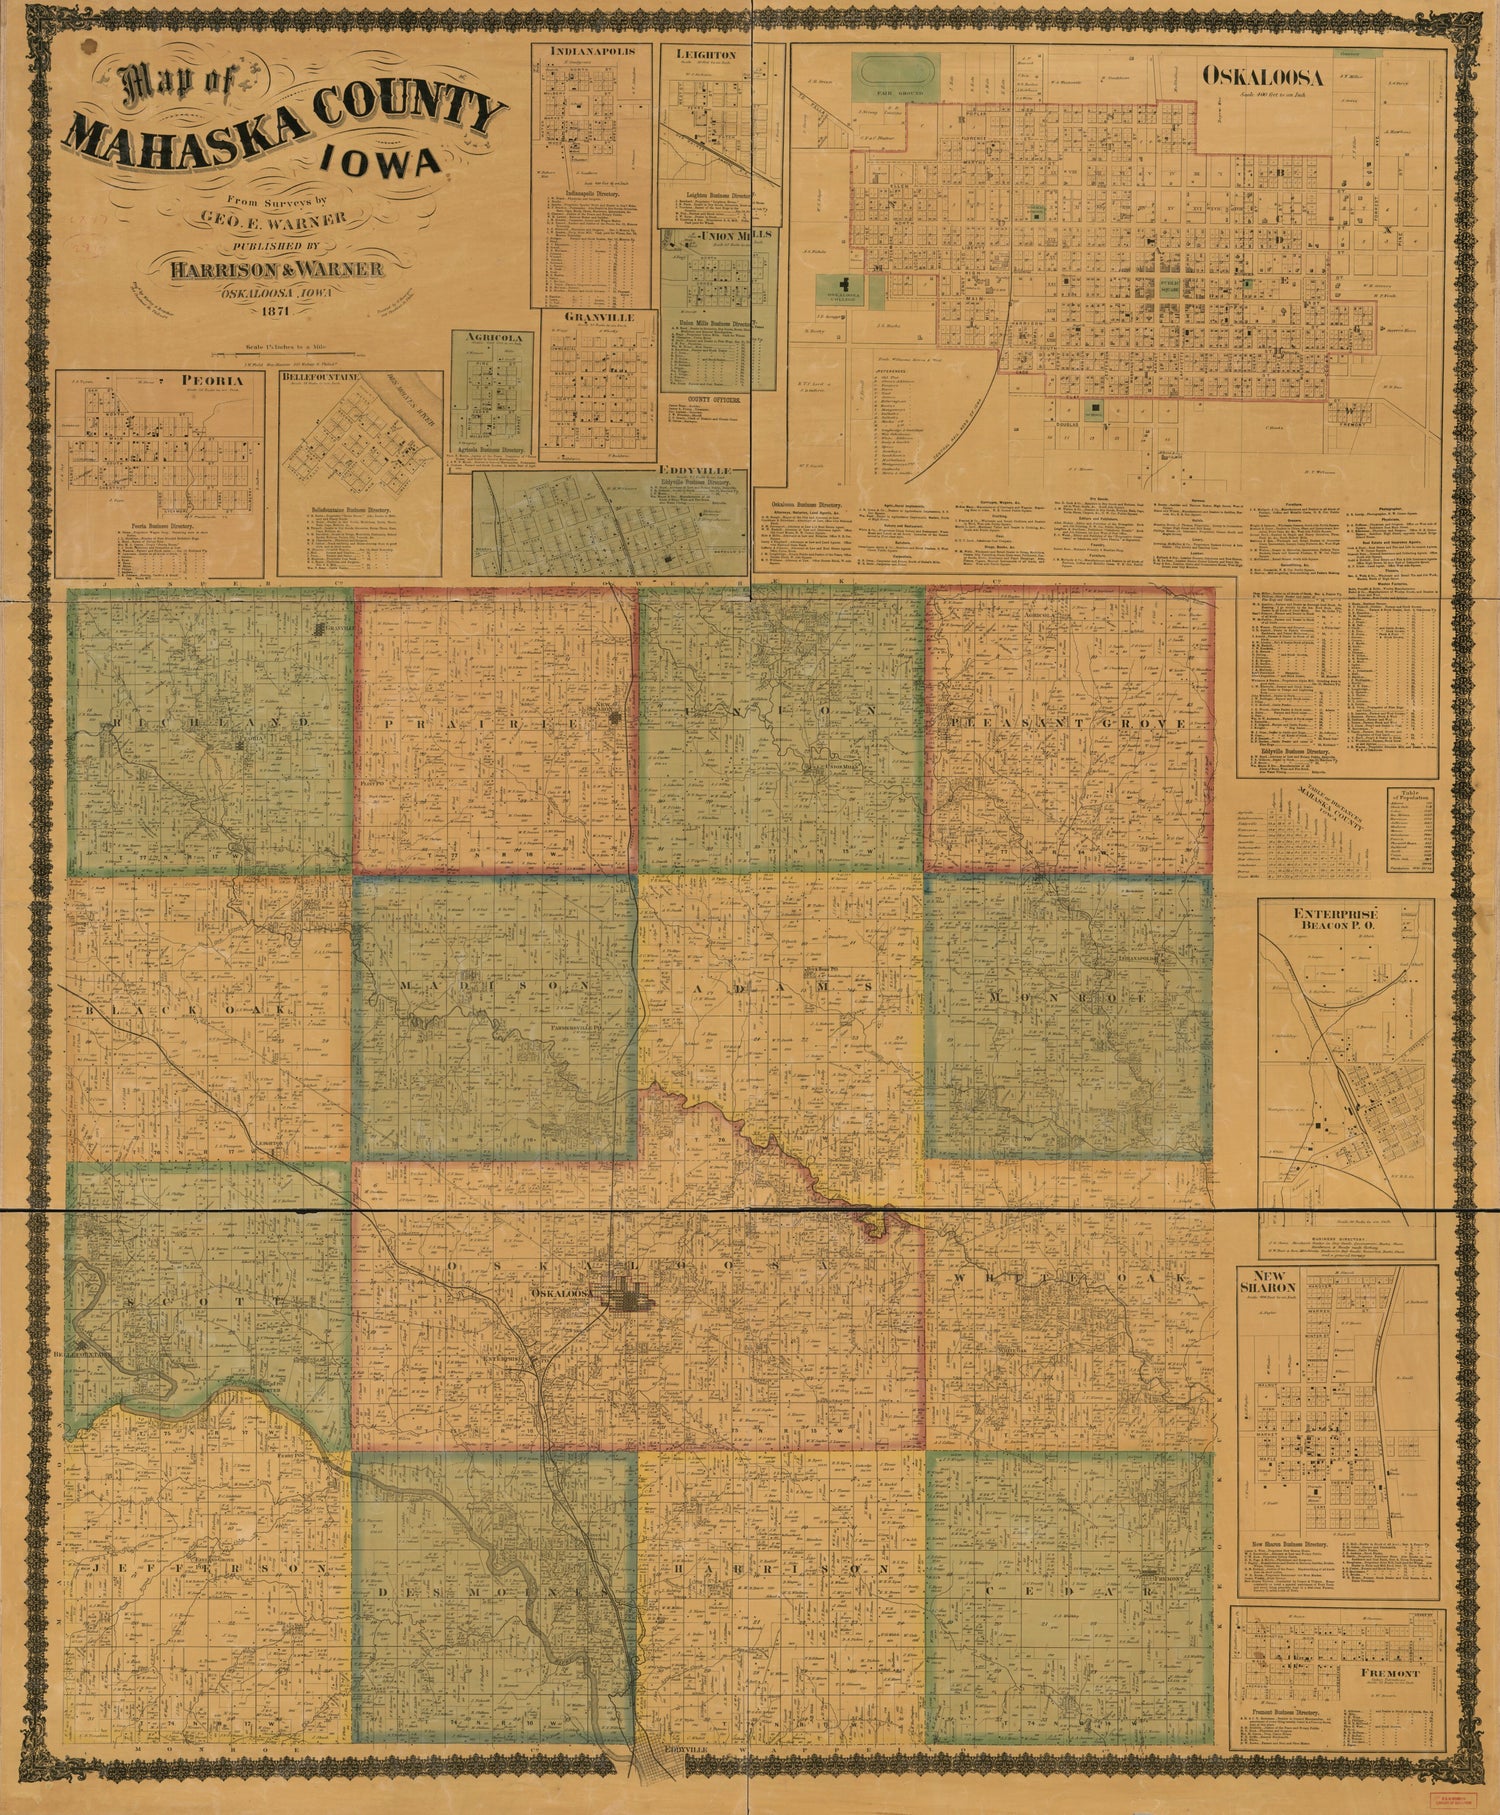 This old map of Map of Mahaska County, Iowa from 1871 was created by  F. Bourquin &amp; Co,  Harrison &amp; Warner, George E. Warner,  Worley &amp; Bracher in 1871